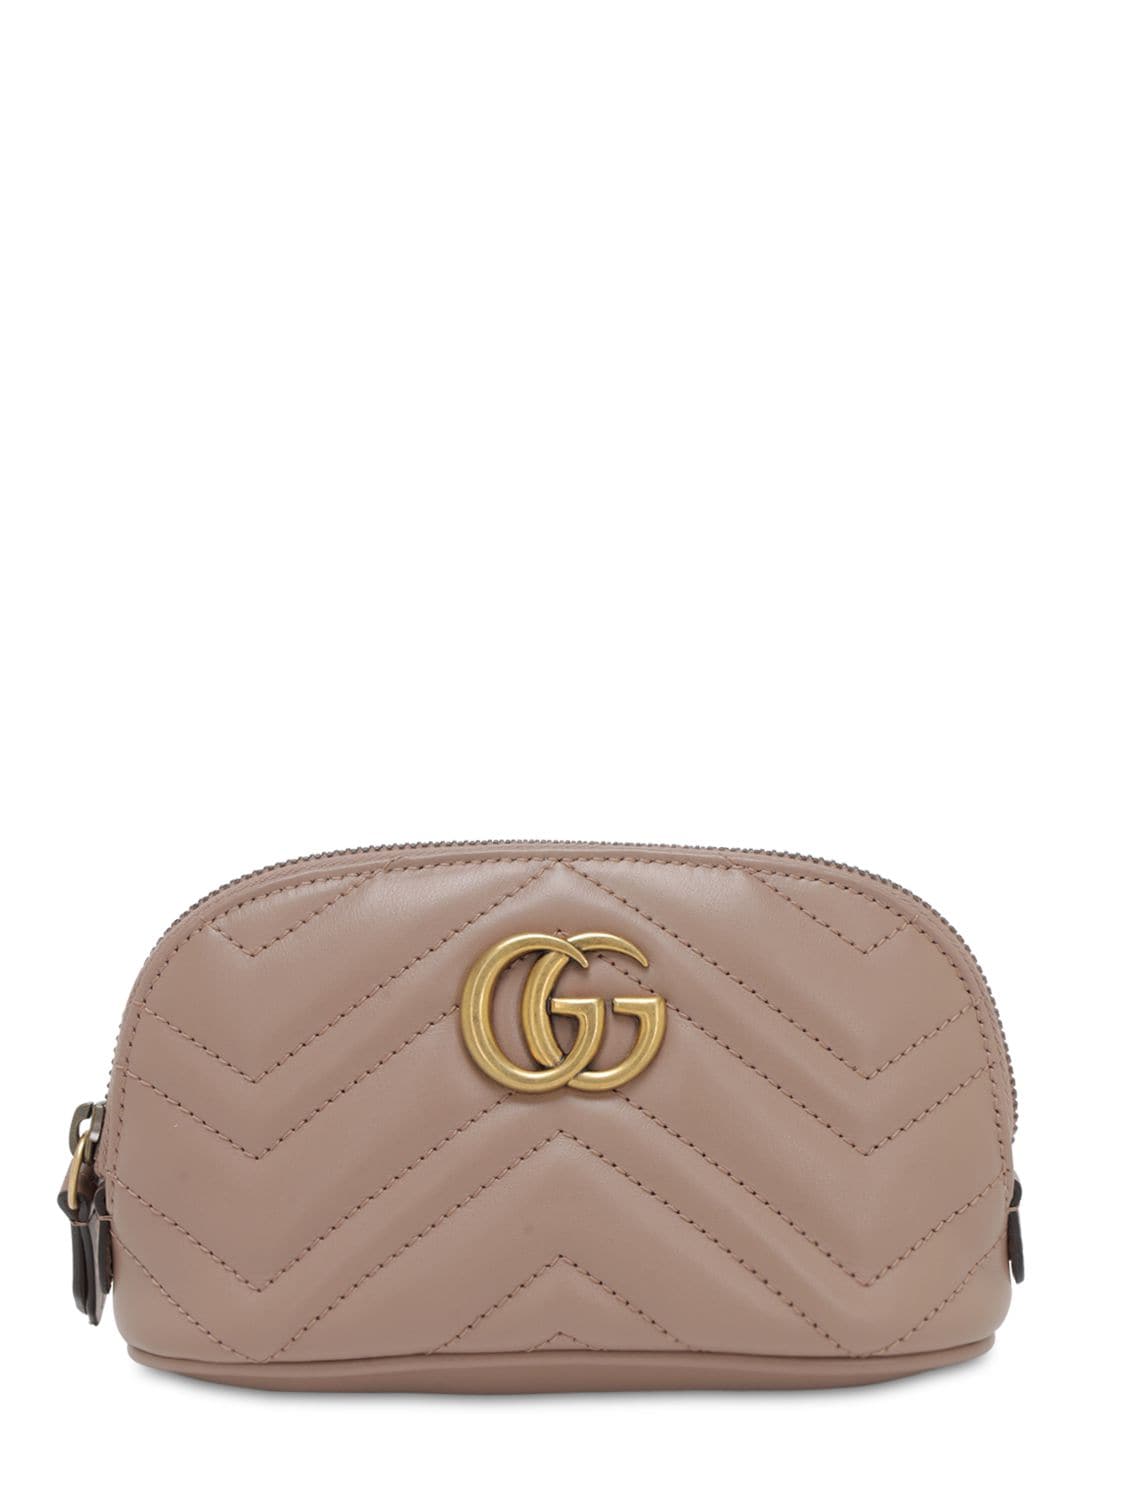 Gucci Small Gg Marmont Leather Beauty Bag In Porcelain Rose